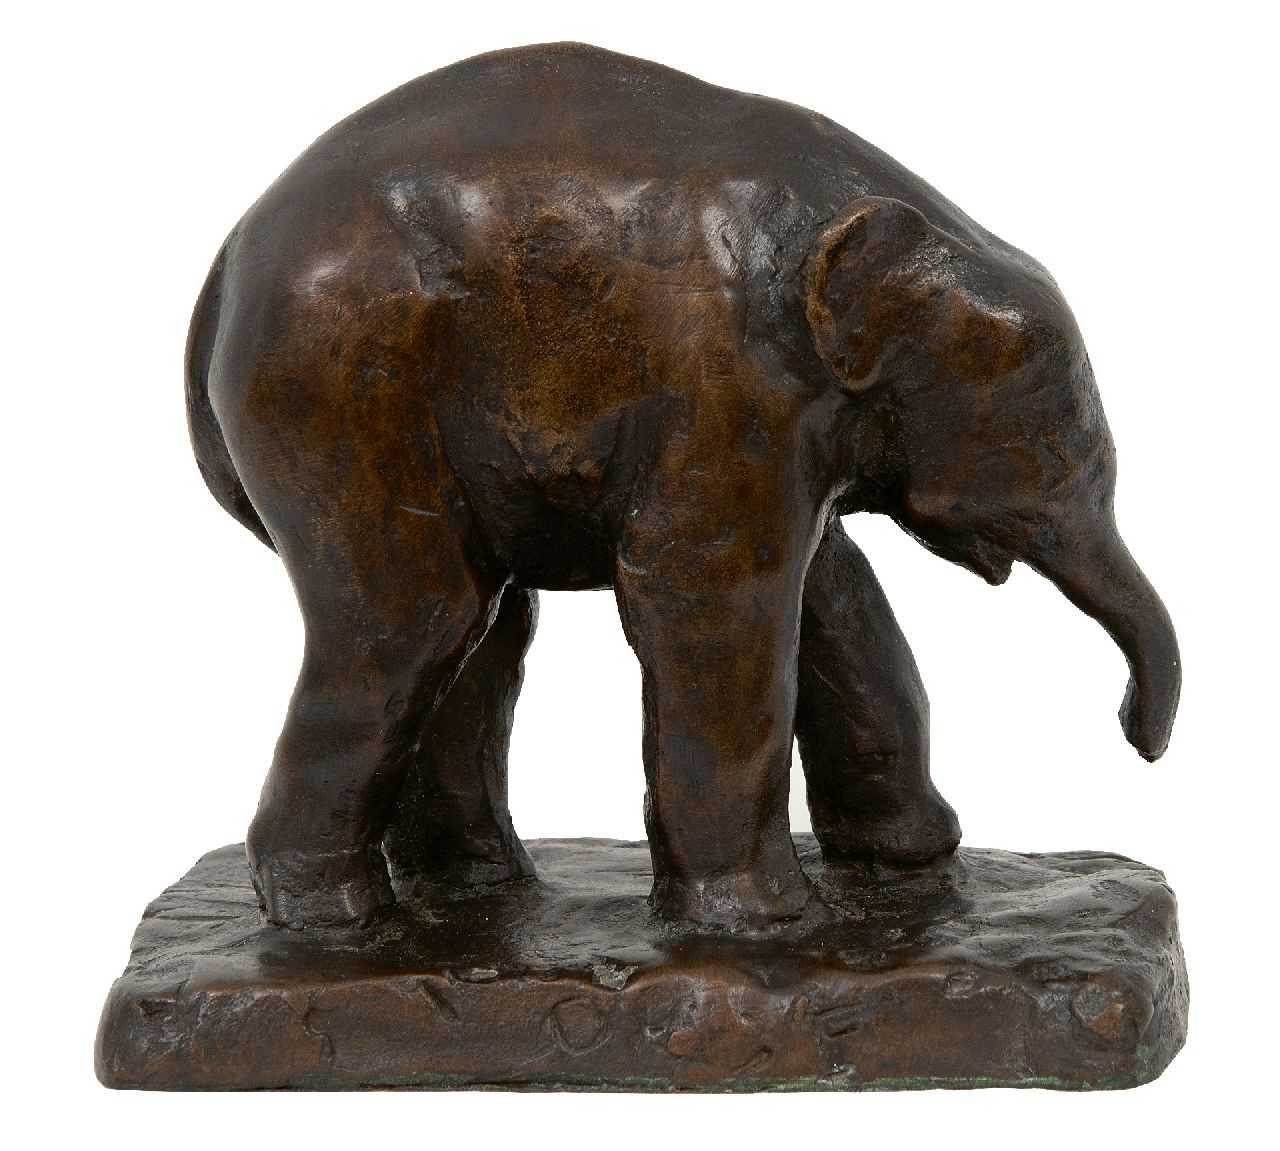 Sachs A.  | Alfred Sachs | Sculptures and objects offered for sale | Elephant Baby Orje from the Berlin Zoo (posthumous execution), bronze 16.3 x 15.6 cm, signed on the base